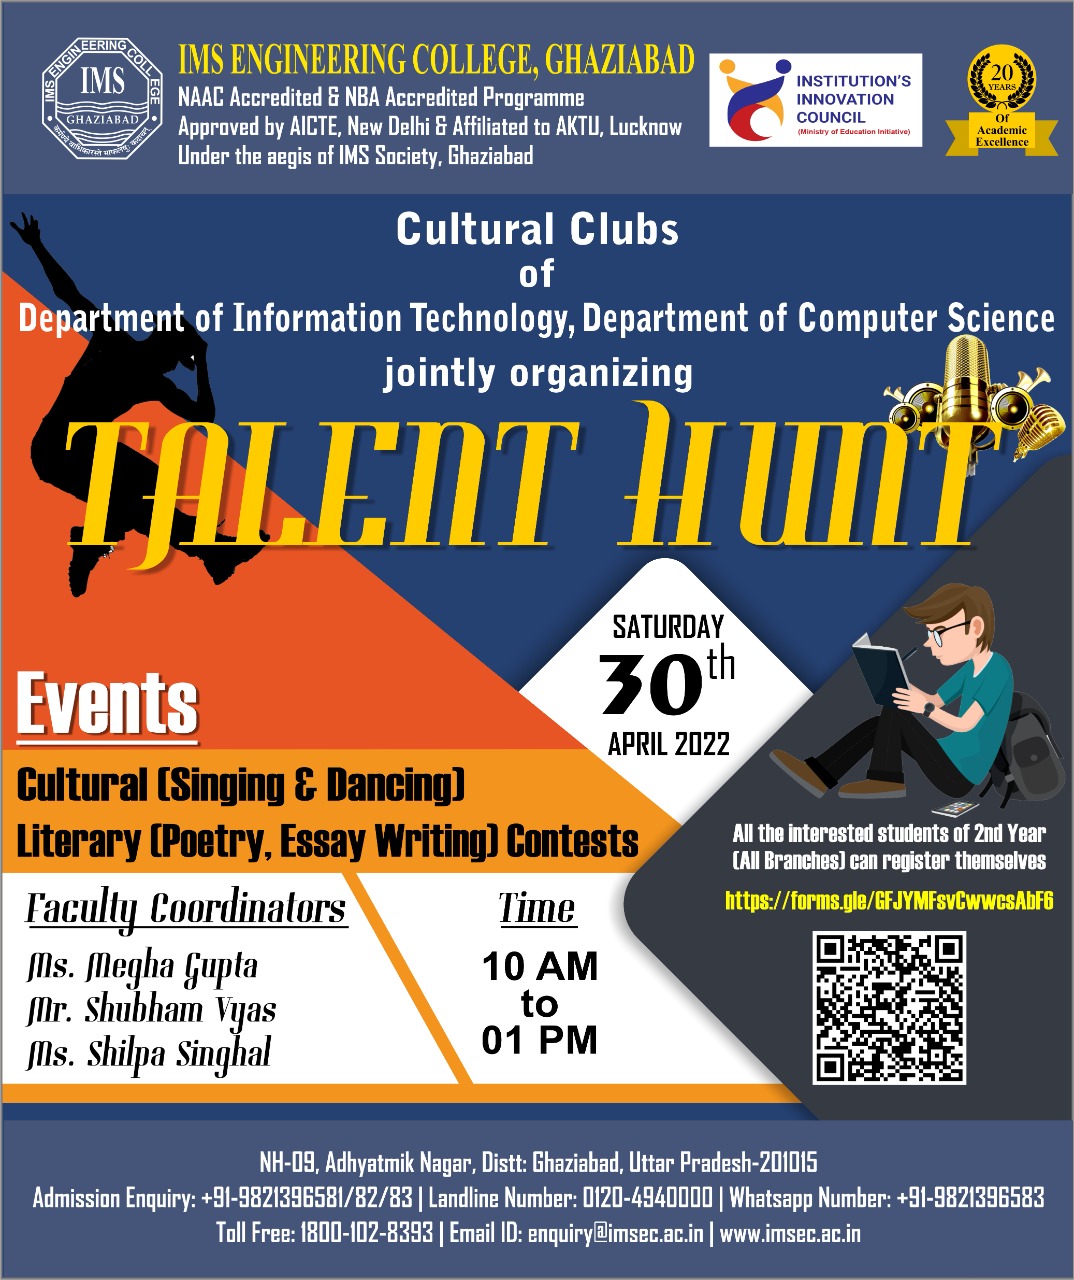 Department of IT & CSE are jointly organising TALENT HUNT event